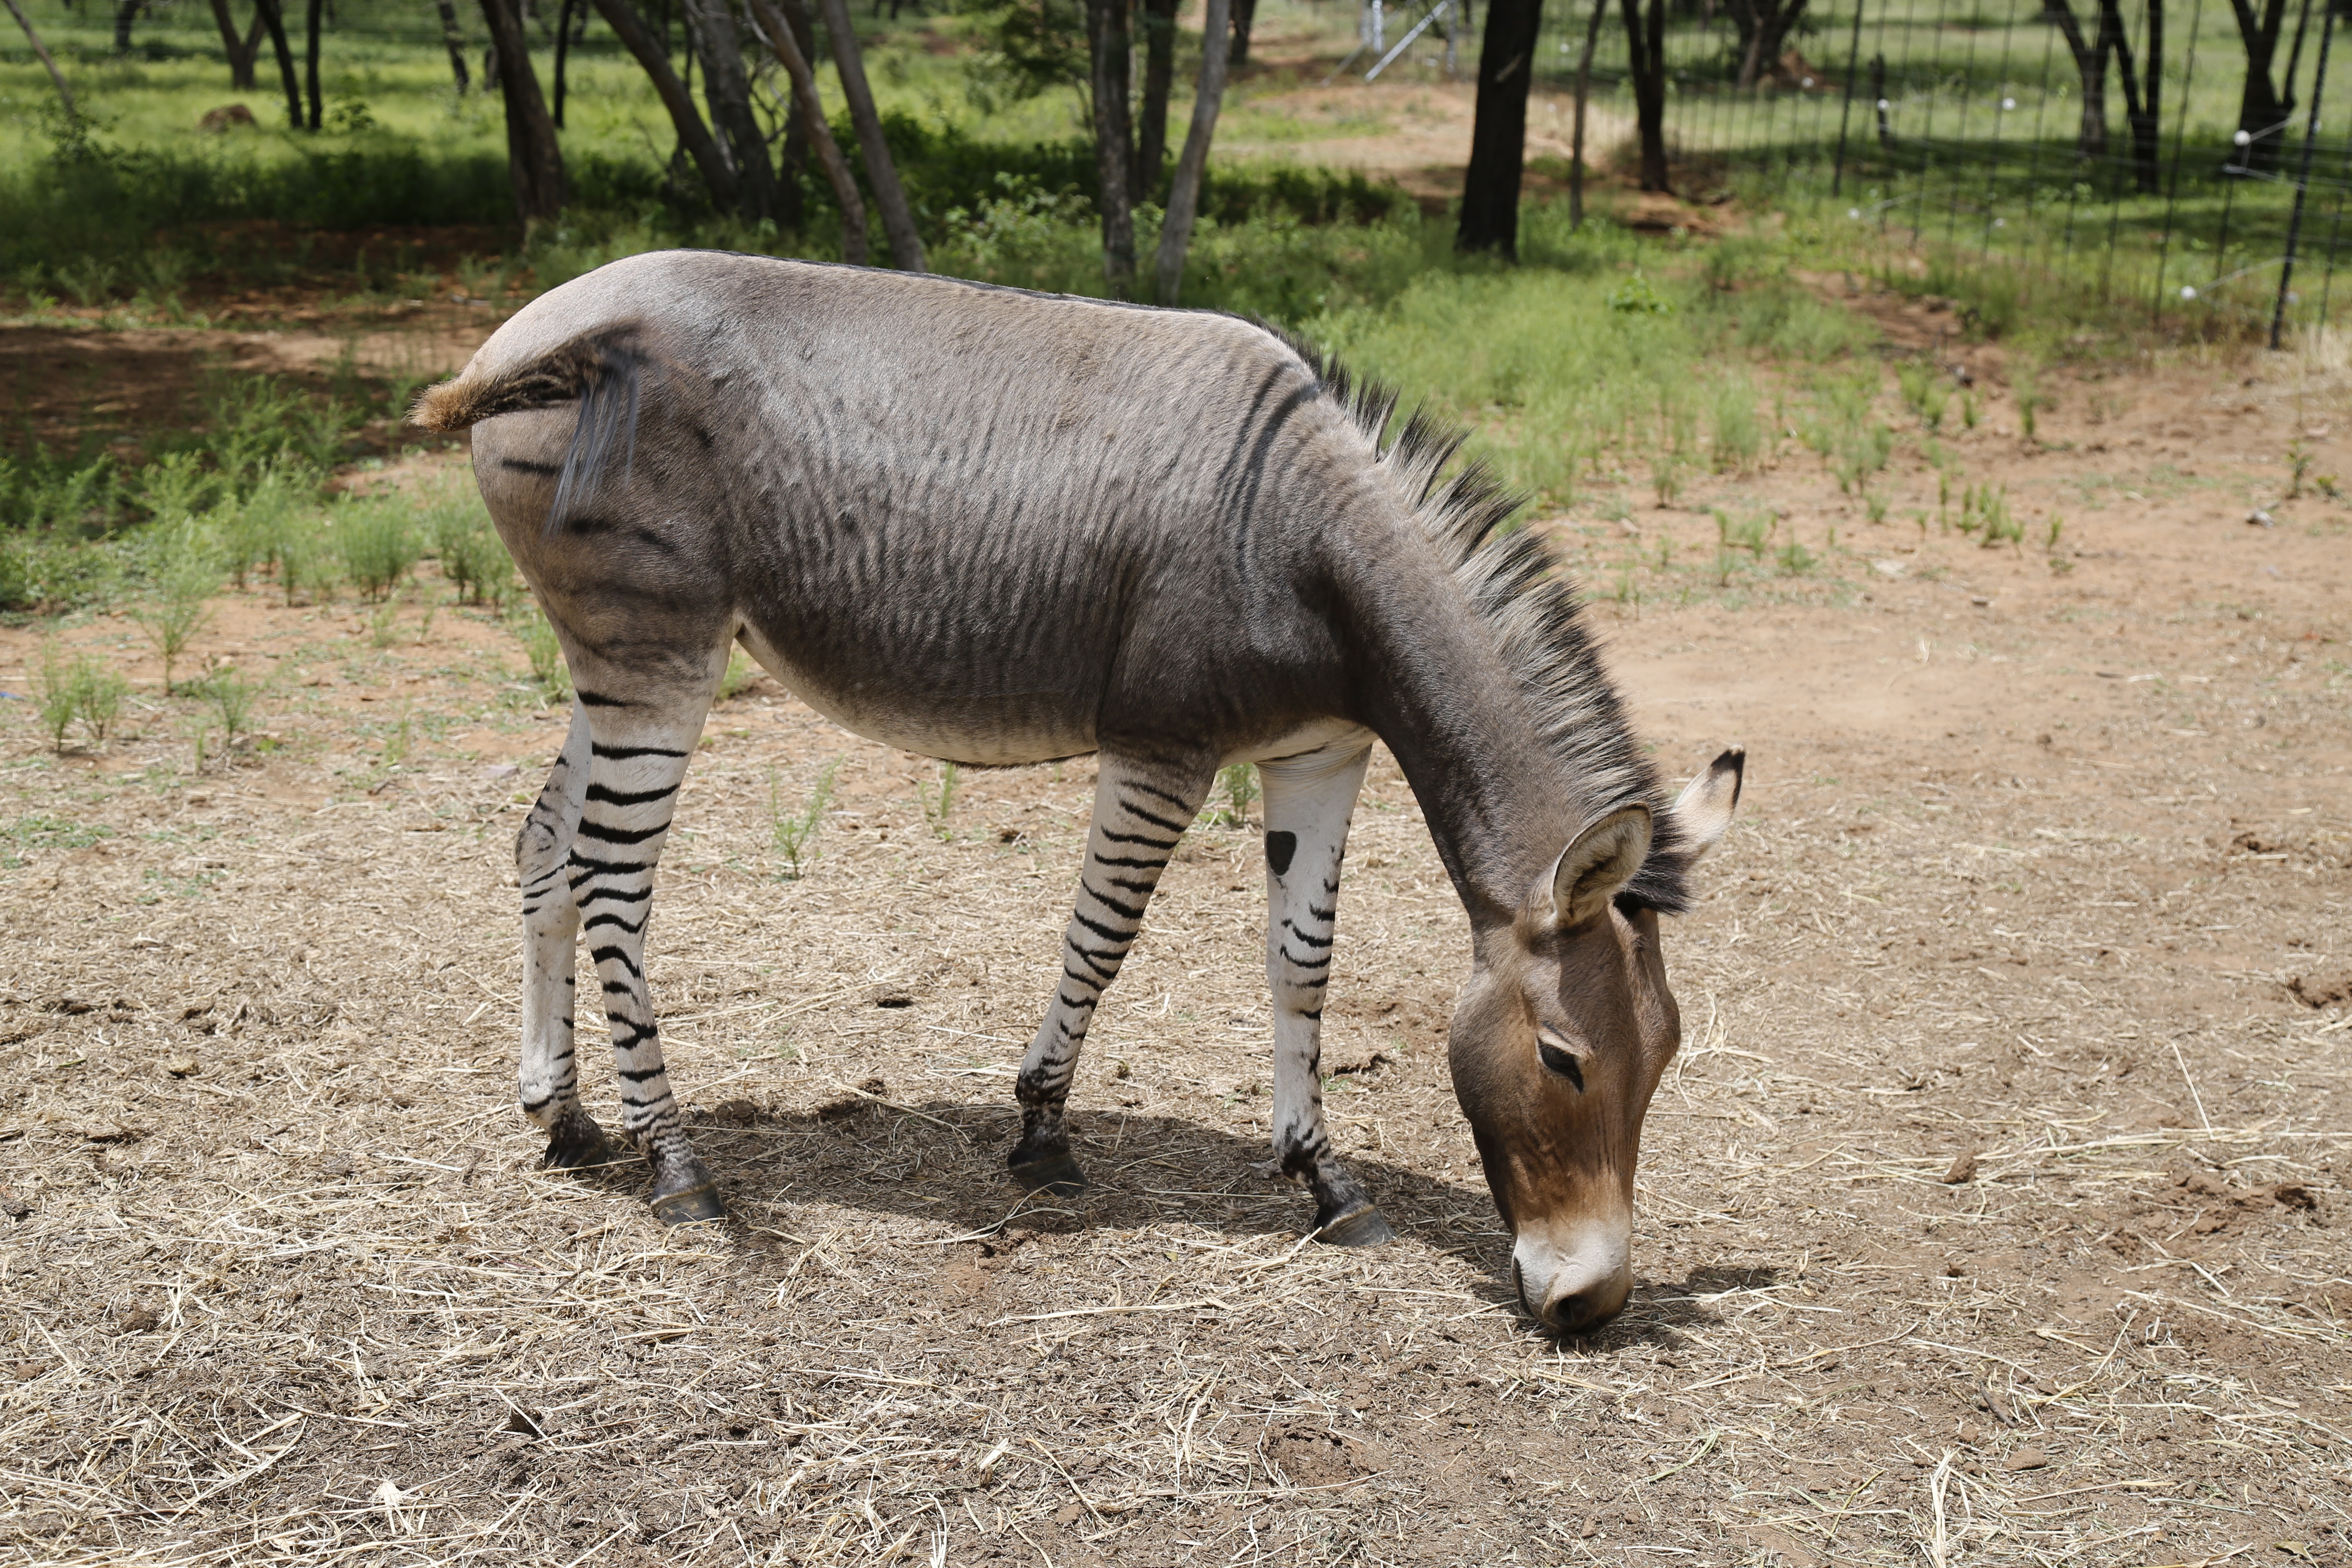 A zebroid,also known as, zedonk, zorse, zebra mule, zonkey, and zebmule by TANGdesign